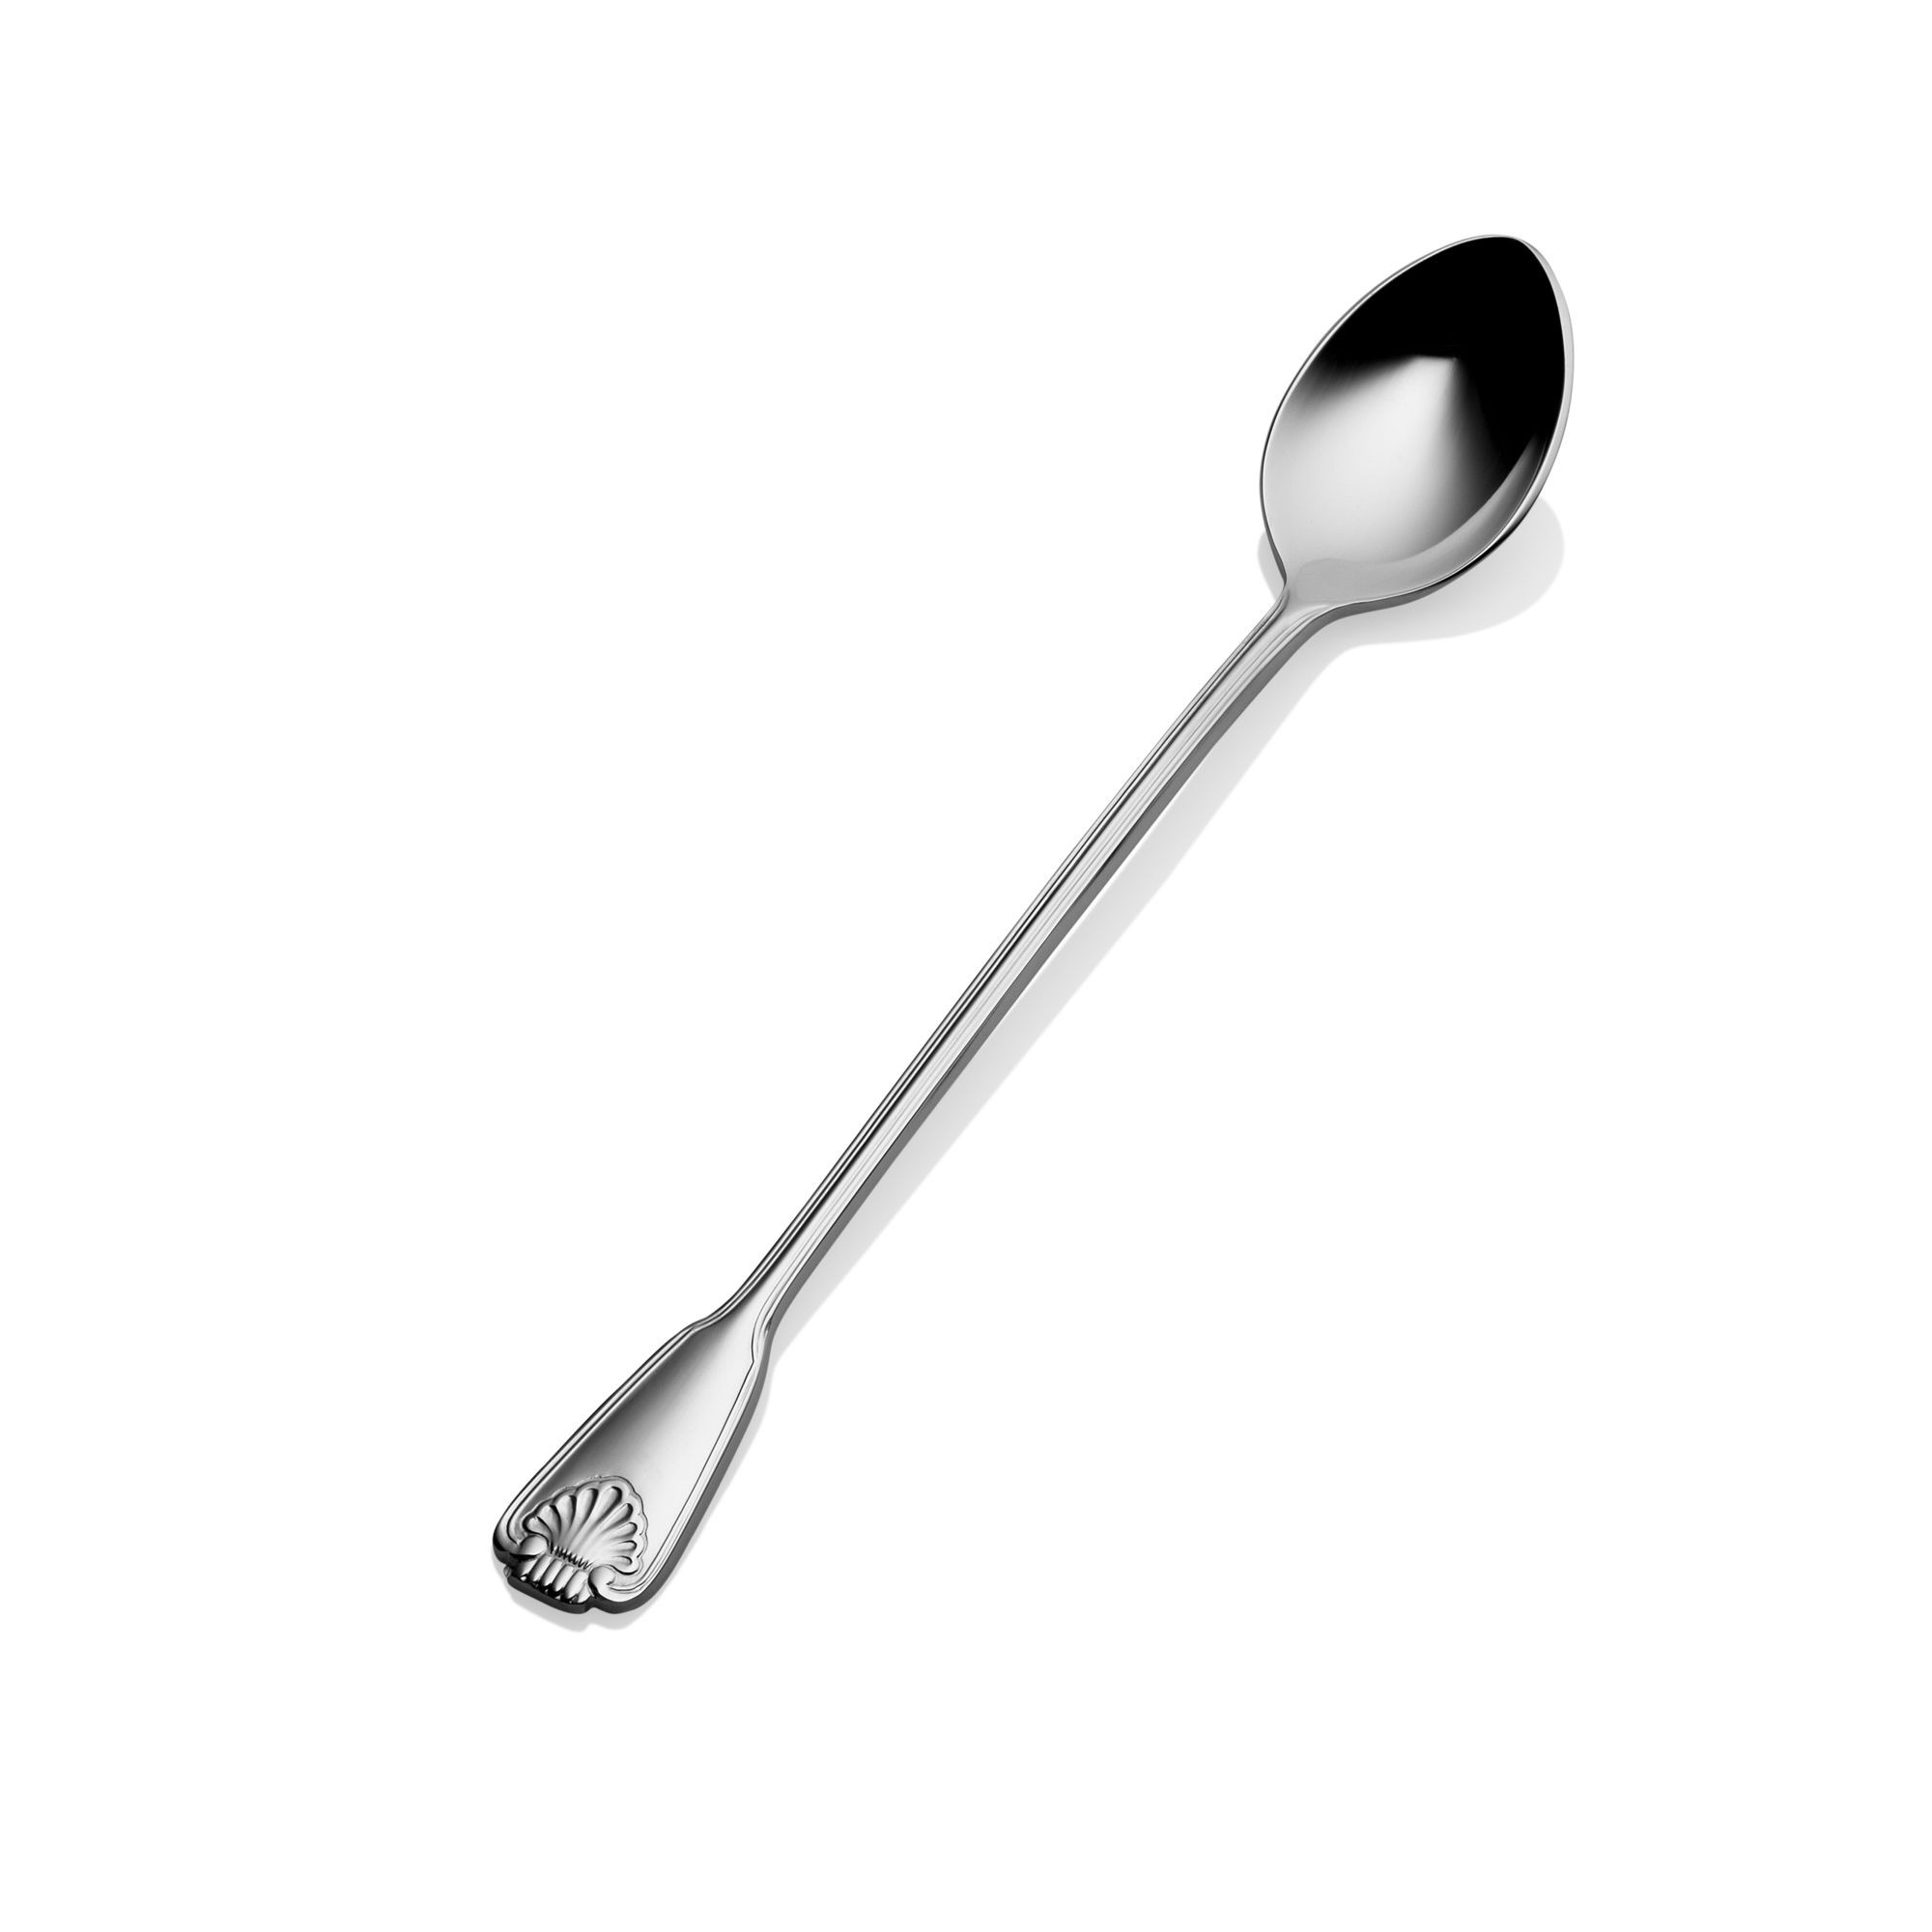 Bon Chef S2002 Shell 18/8 Stainless Steel Iced Tea Spoon